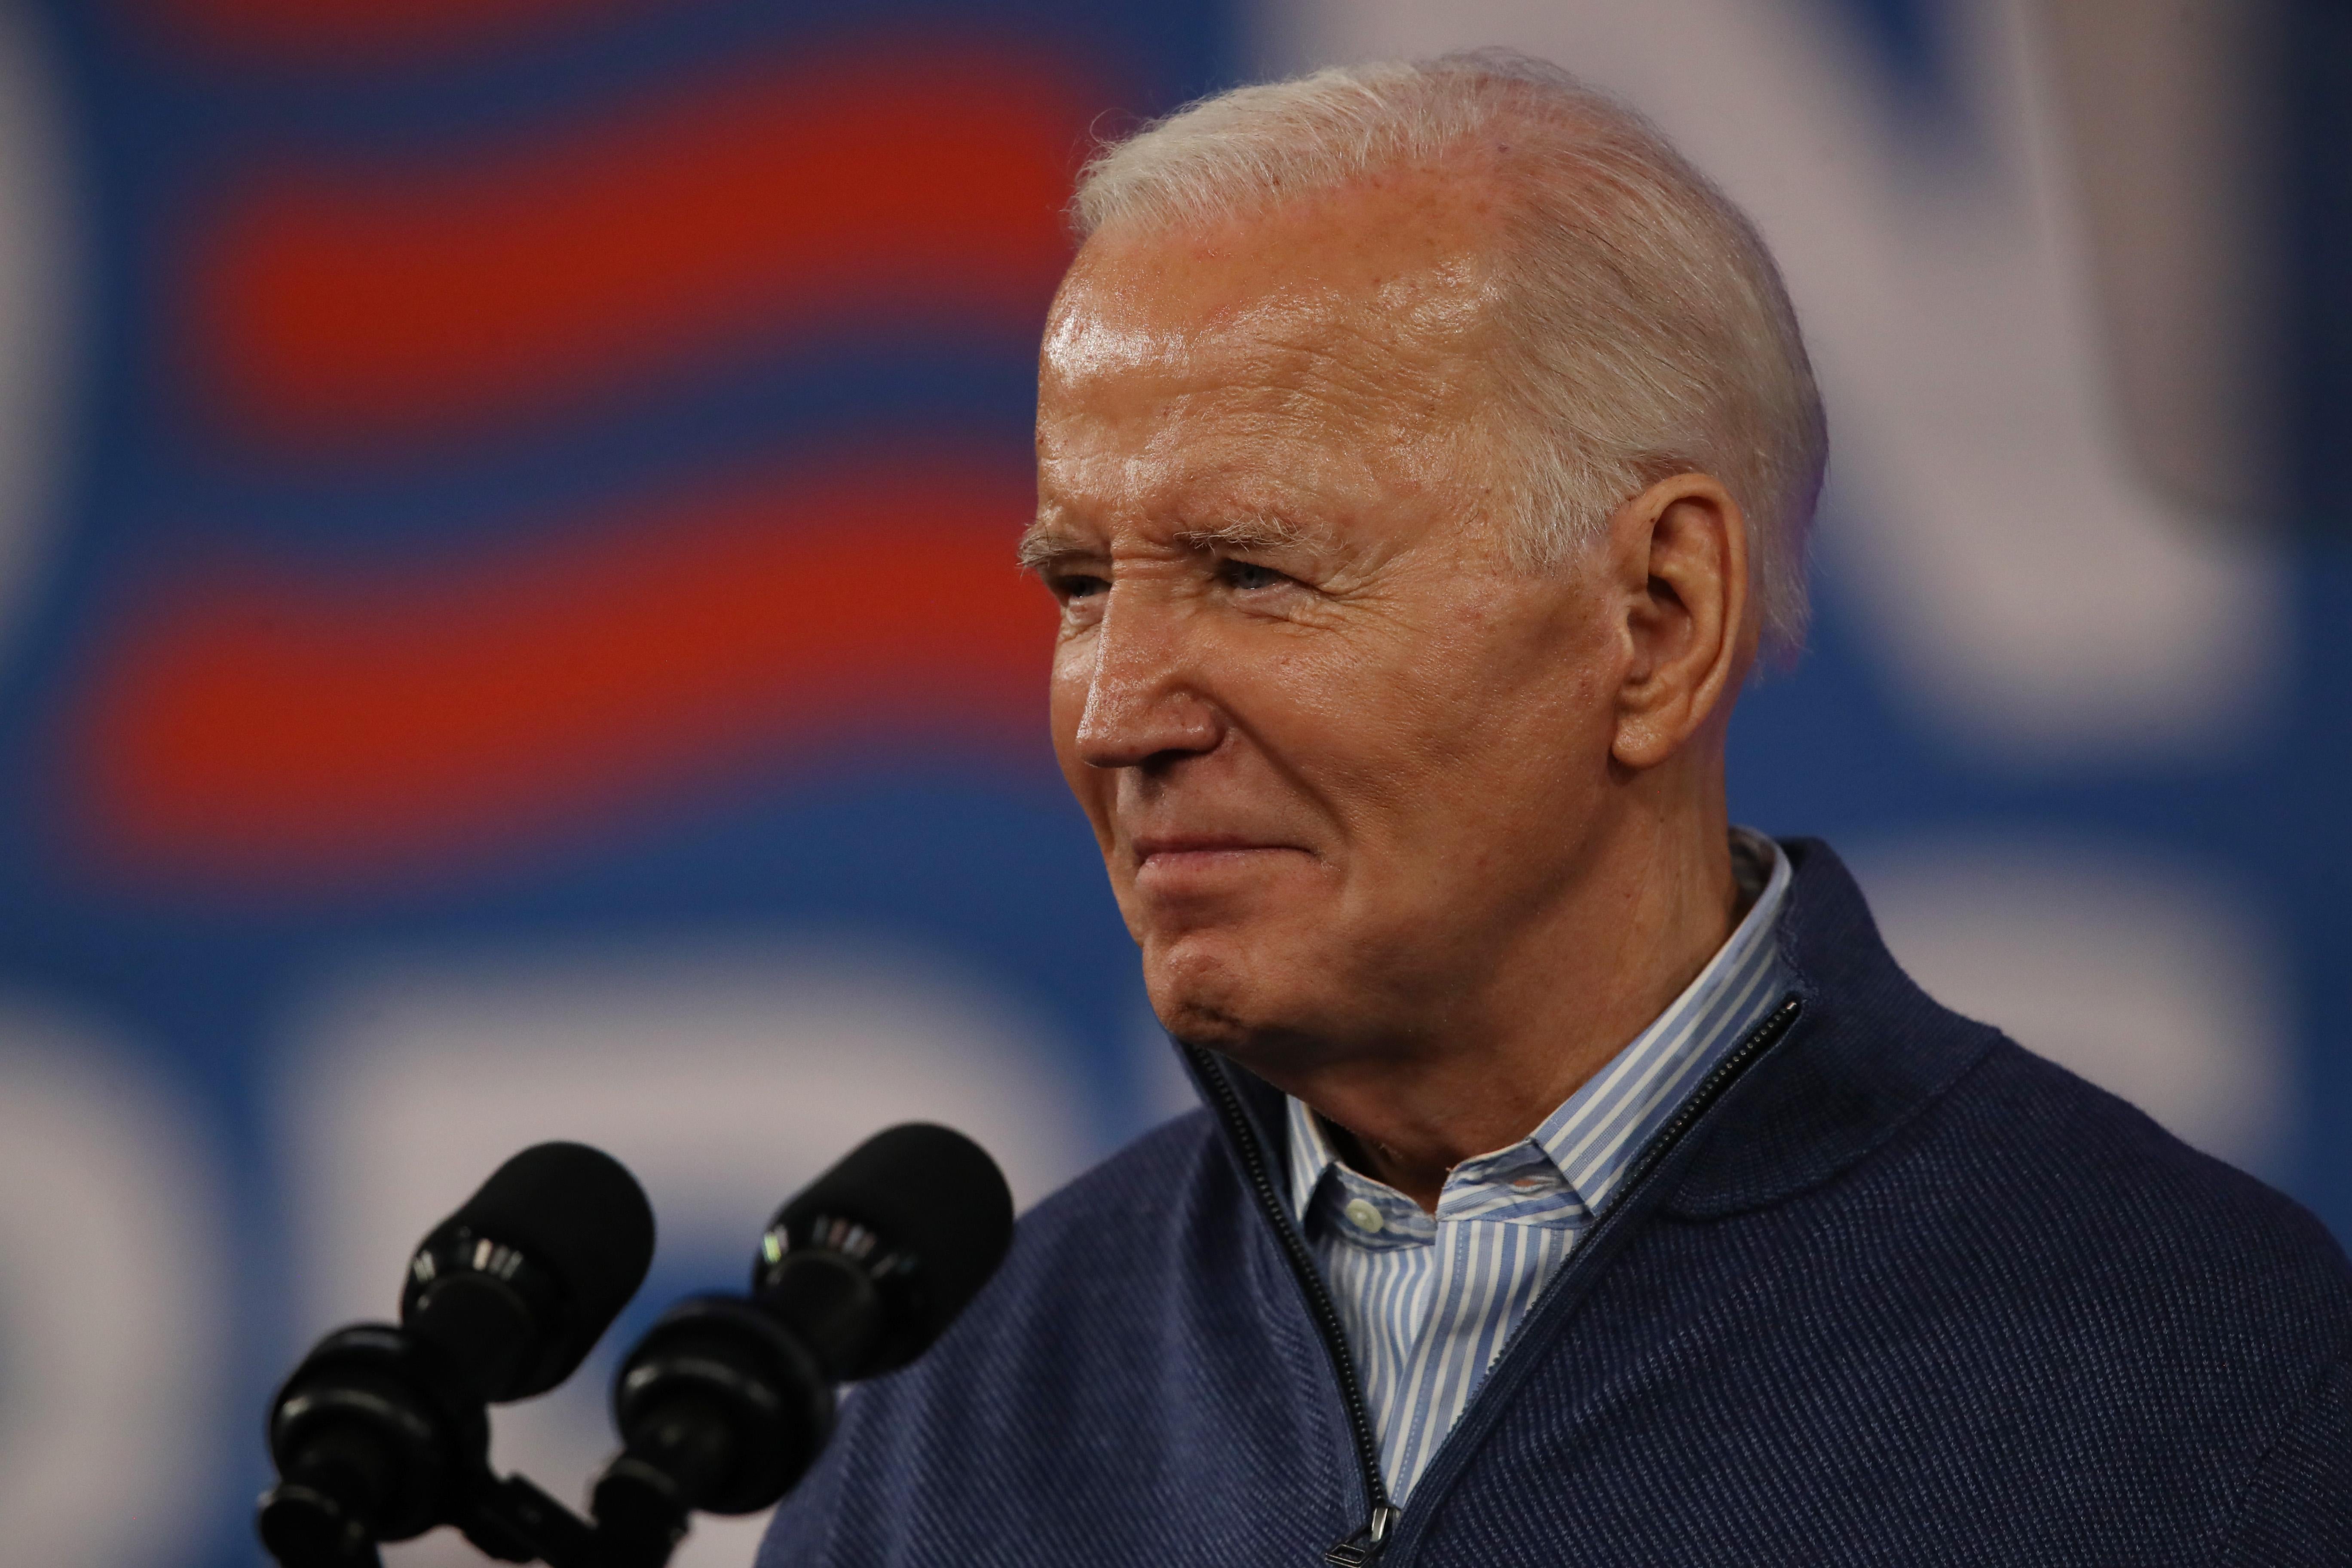 President Joe Biden at the mic during a campaign event.